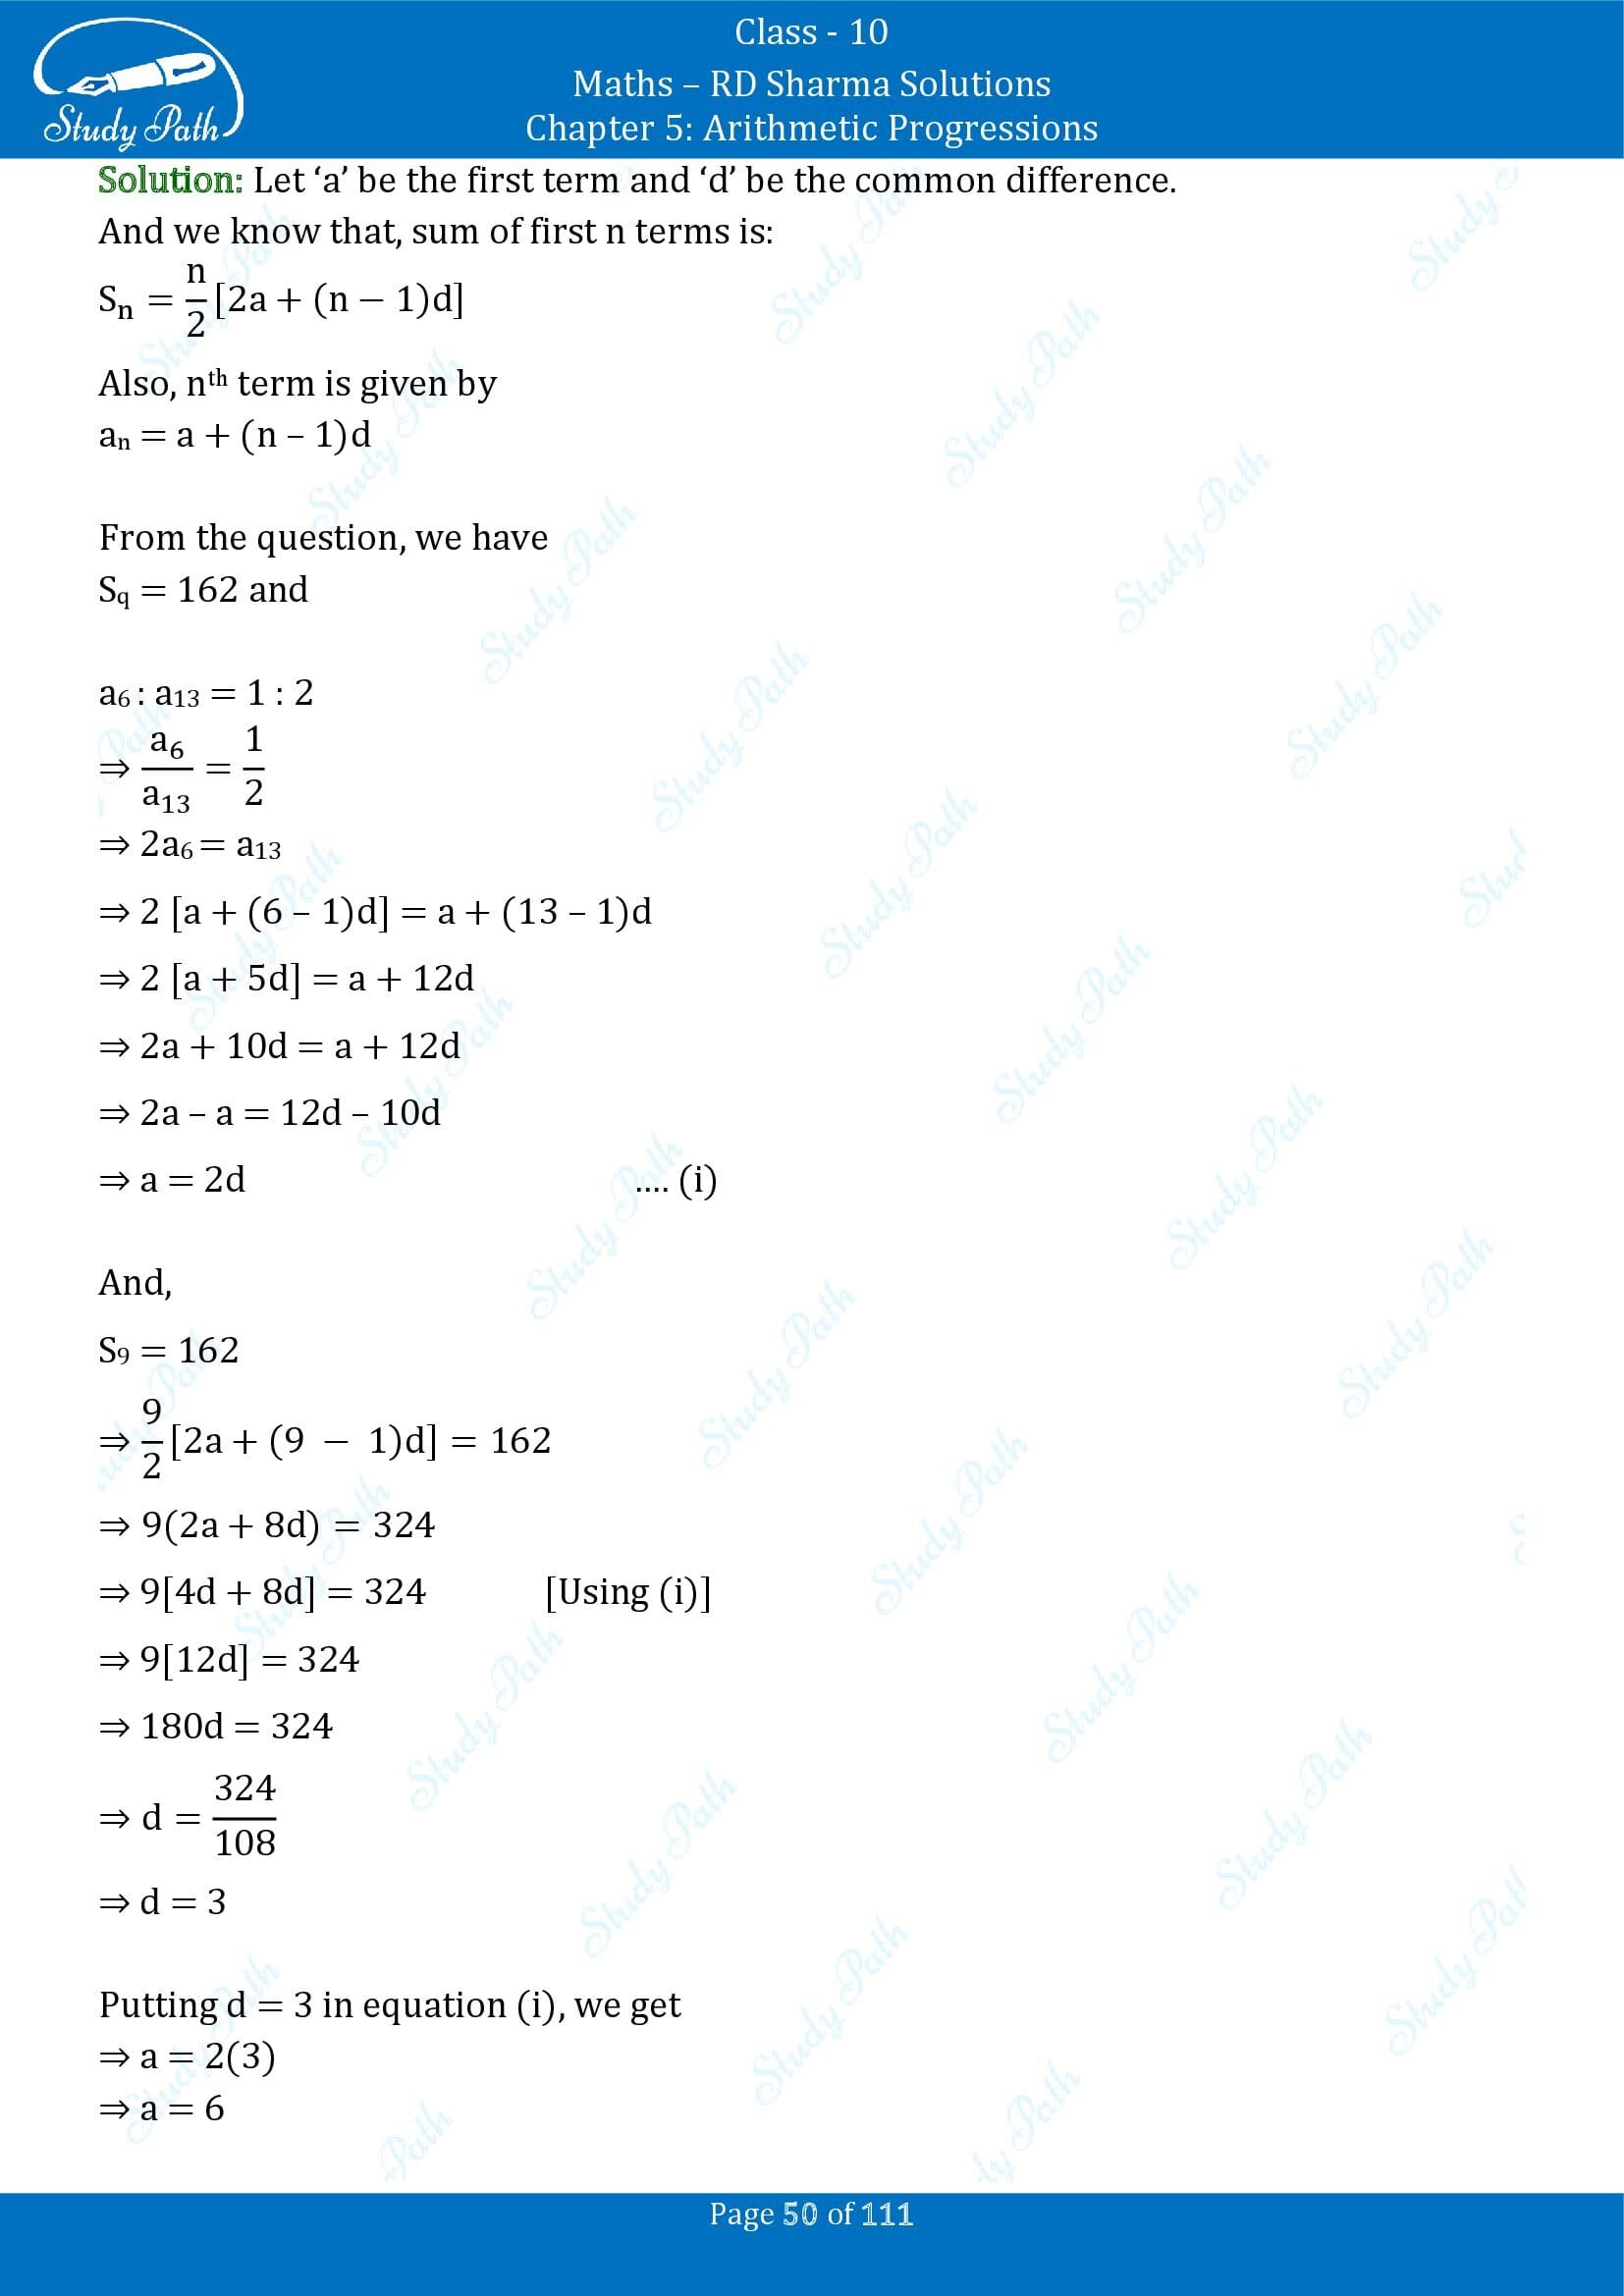 RD Sharma Solutions Class 10 Chapter 5 Arithmetic Progressions Exercise 5.6 00050